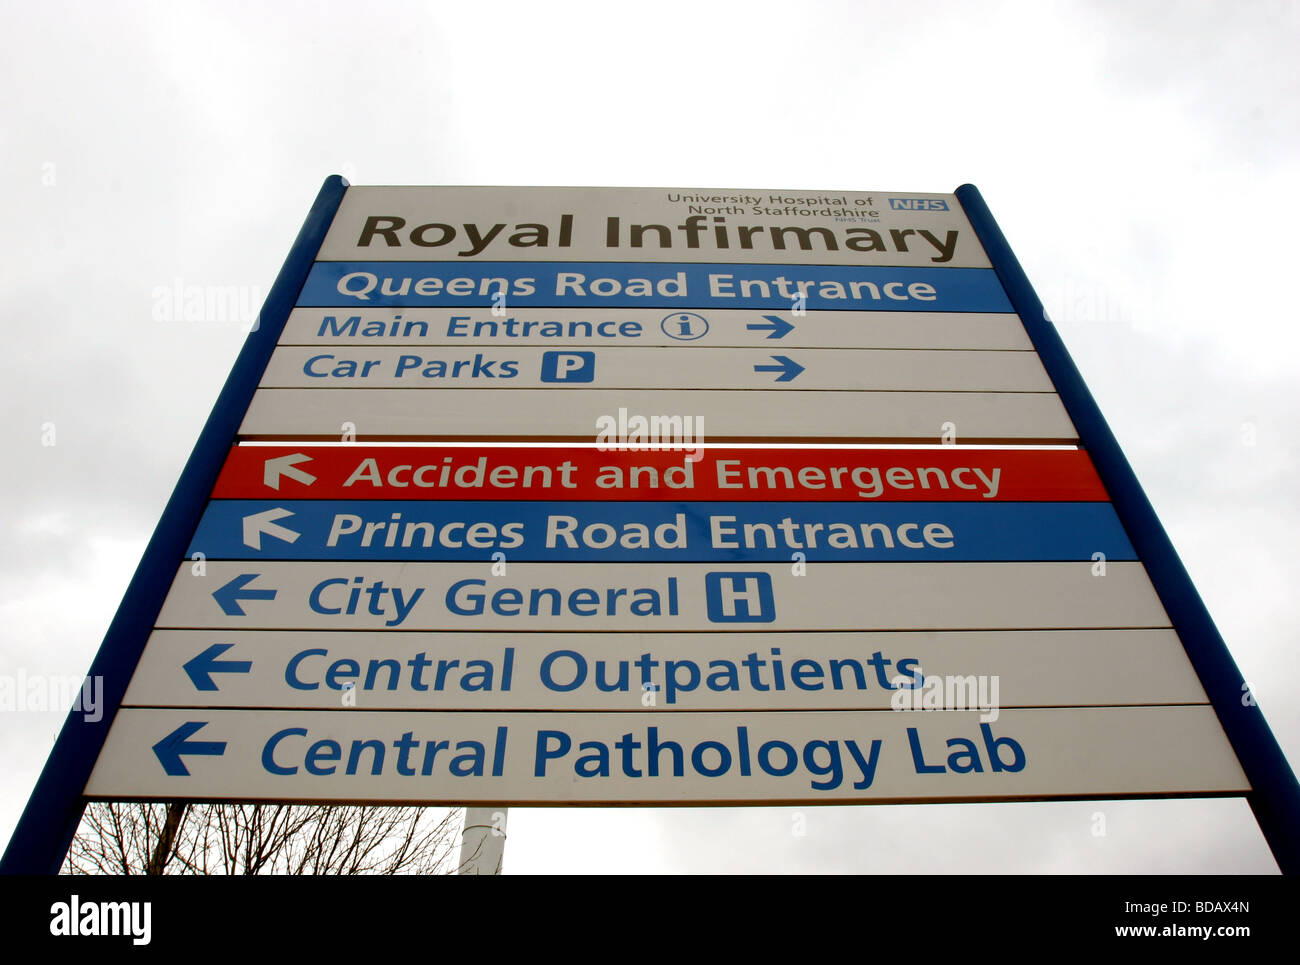 Nord Staffordshire Royal Infirmary Stoke on Trent Staffordshire digital signage Foto Stock